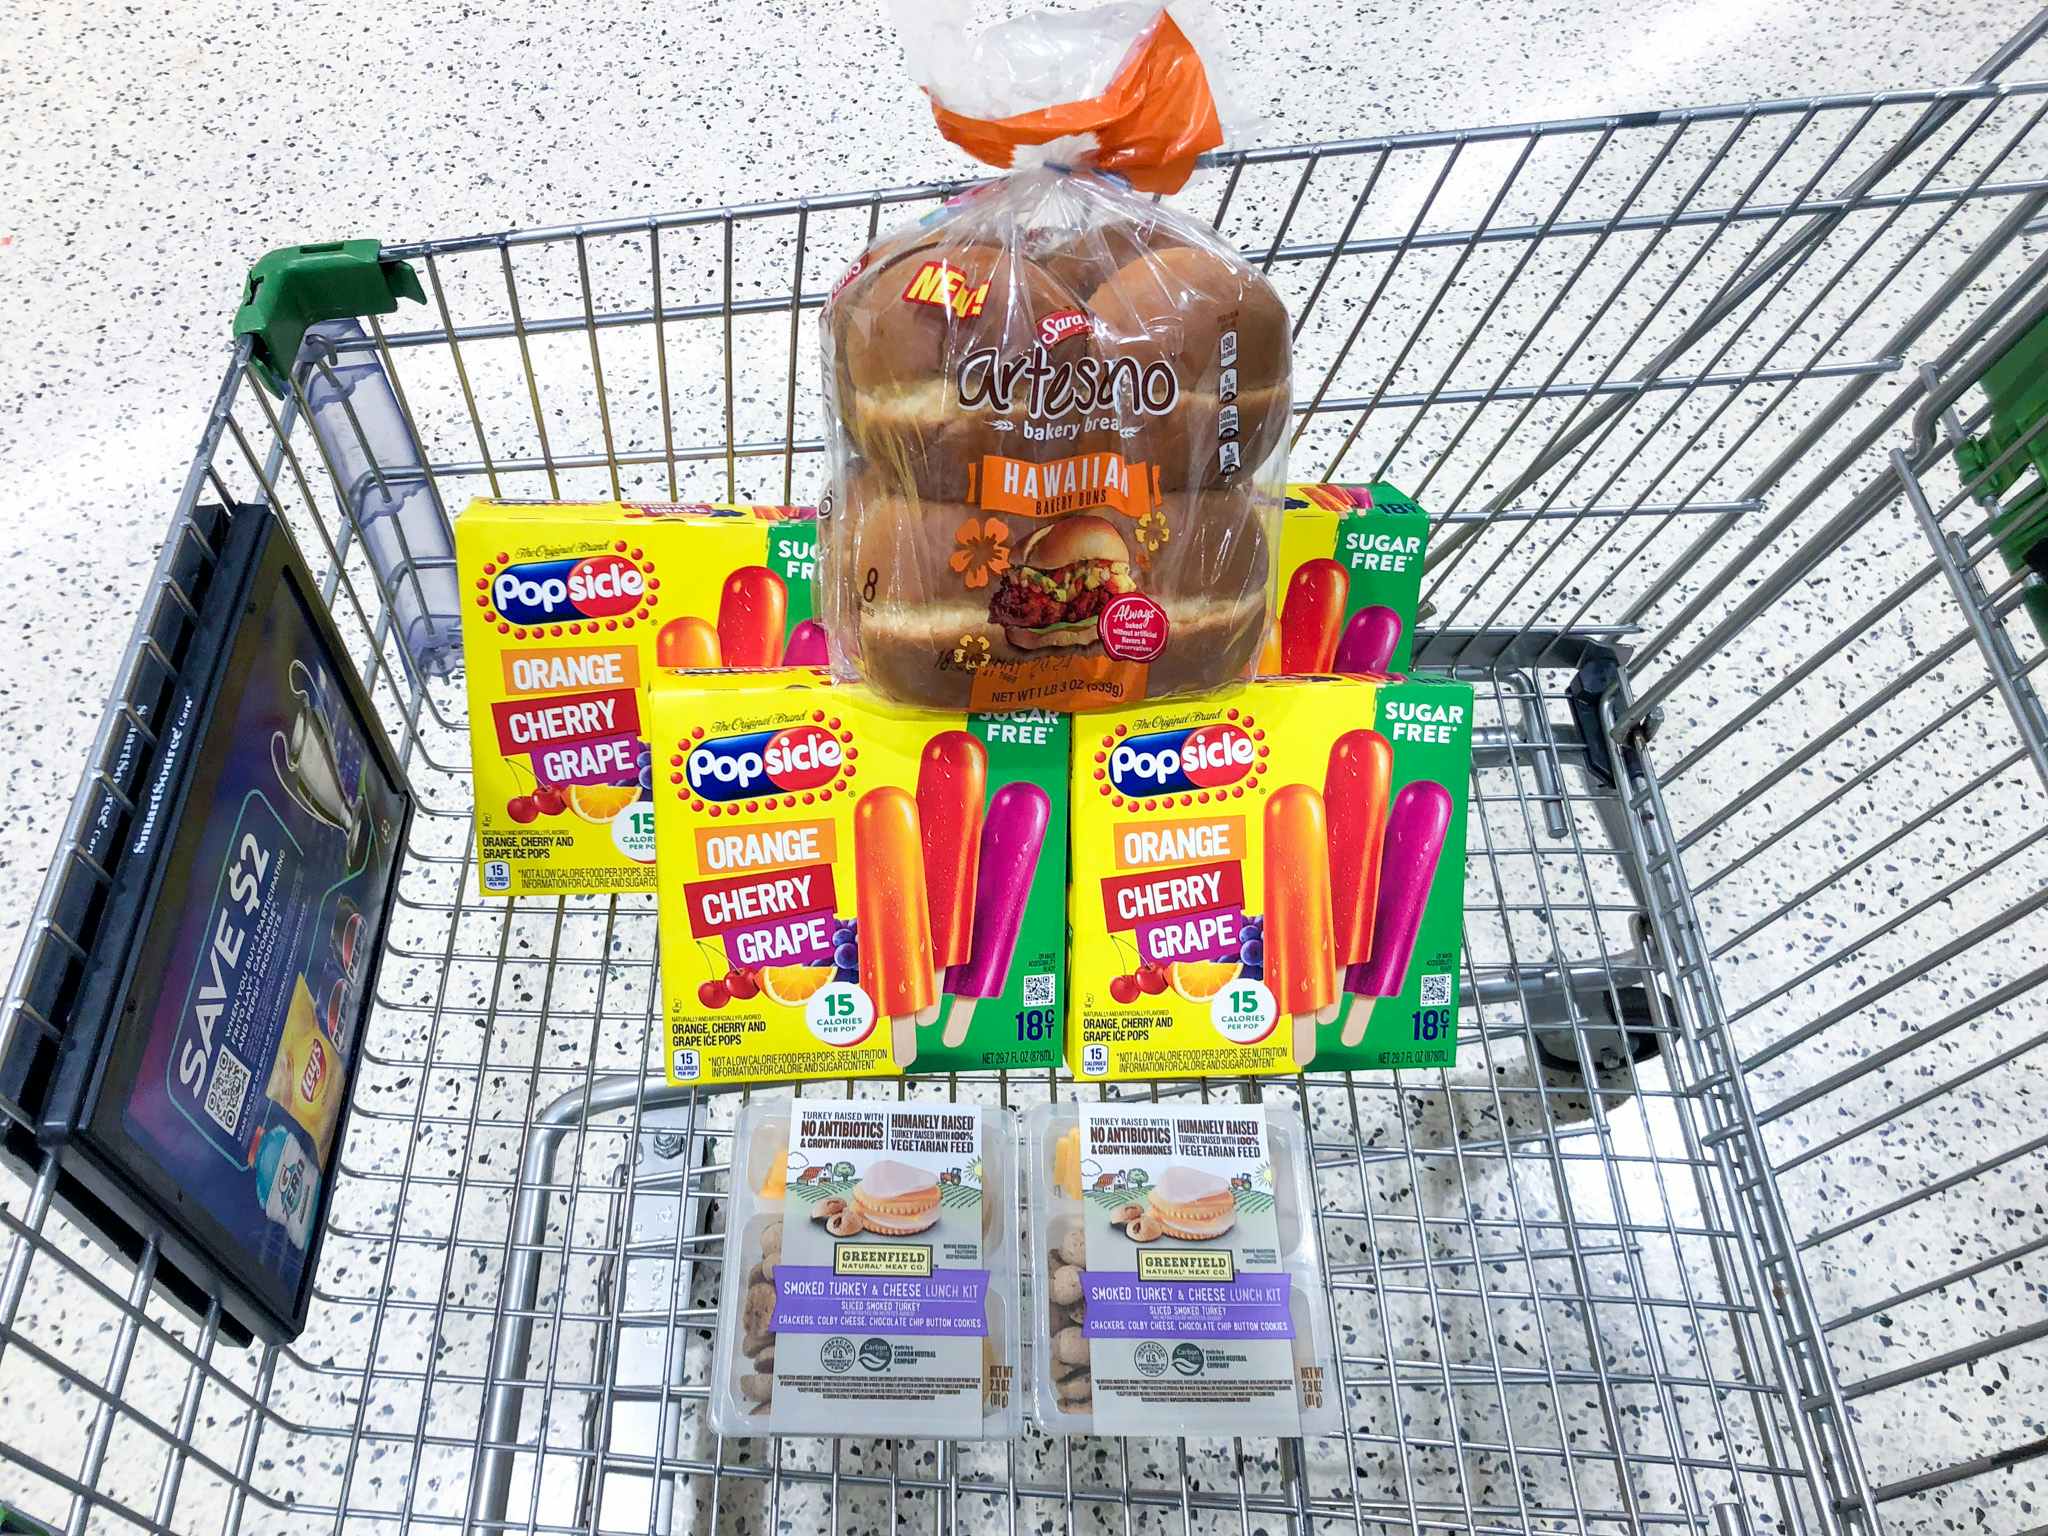 publix greenfield lunch kits popsicles sara lee buns in cart